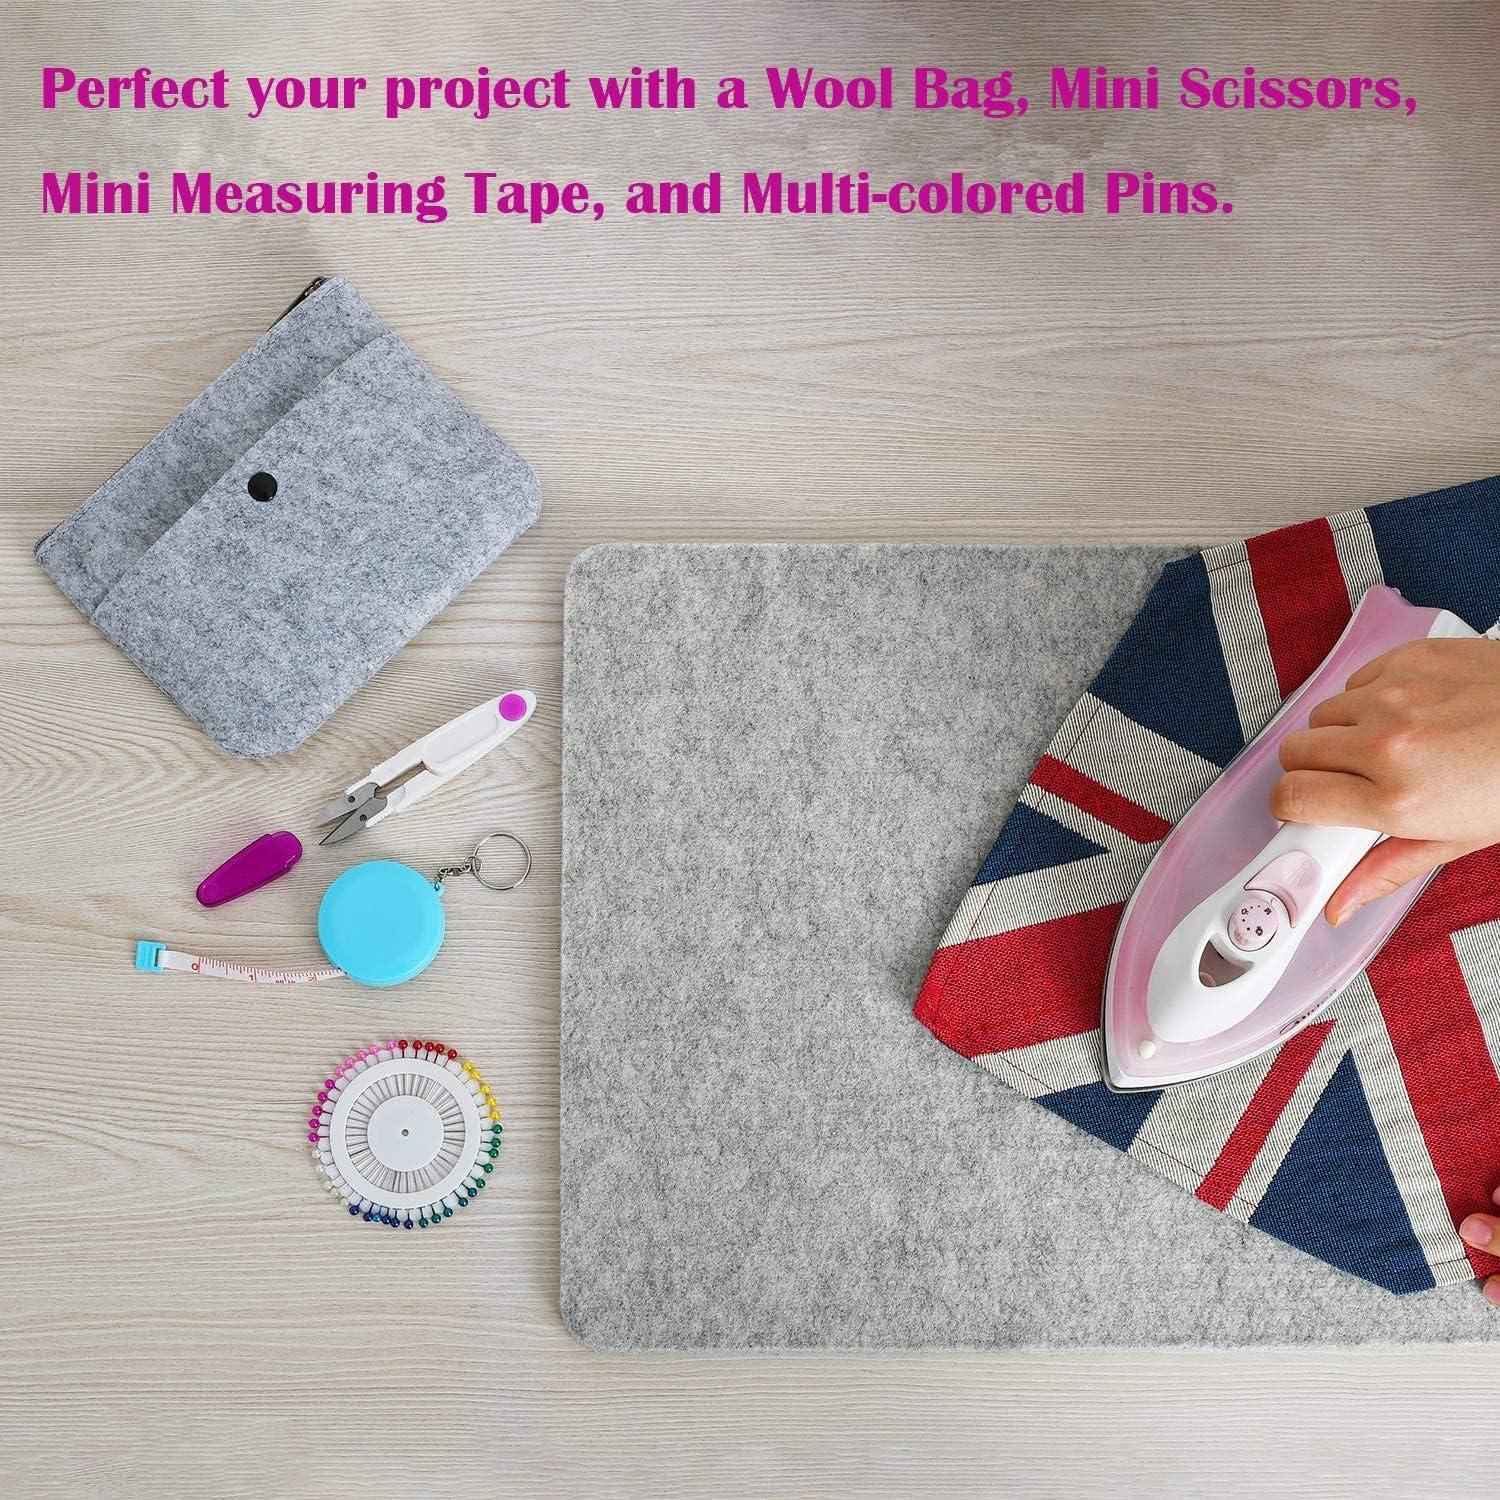 Wool Ironing Mat For Quilting  60 x 22 Wool Ironing Mat For Sewing